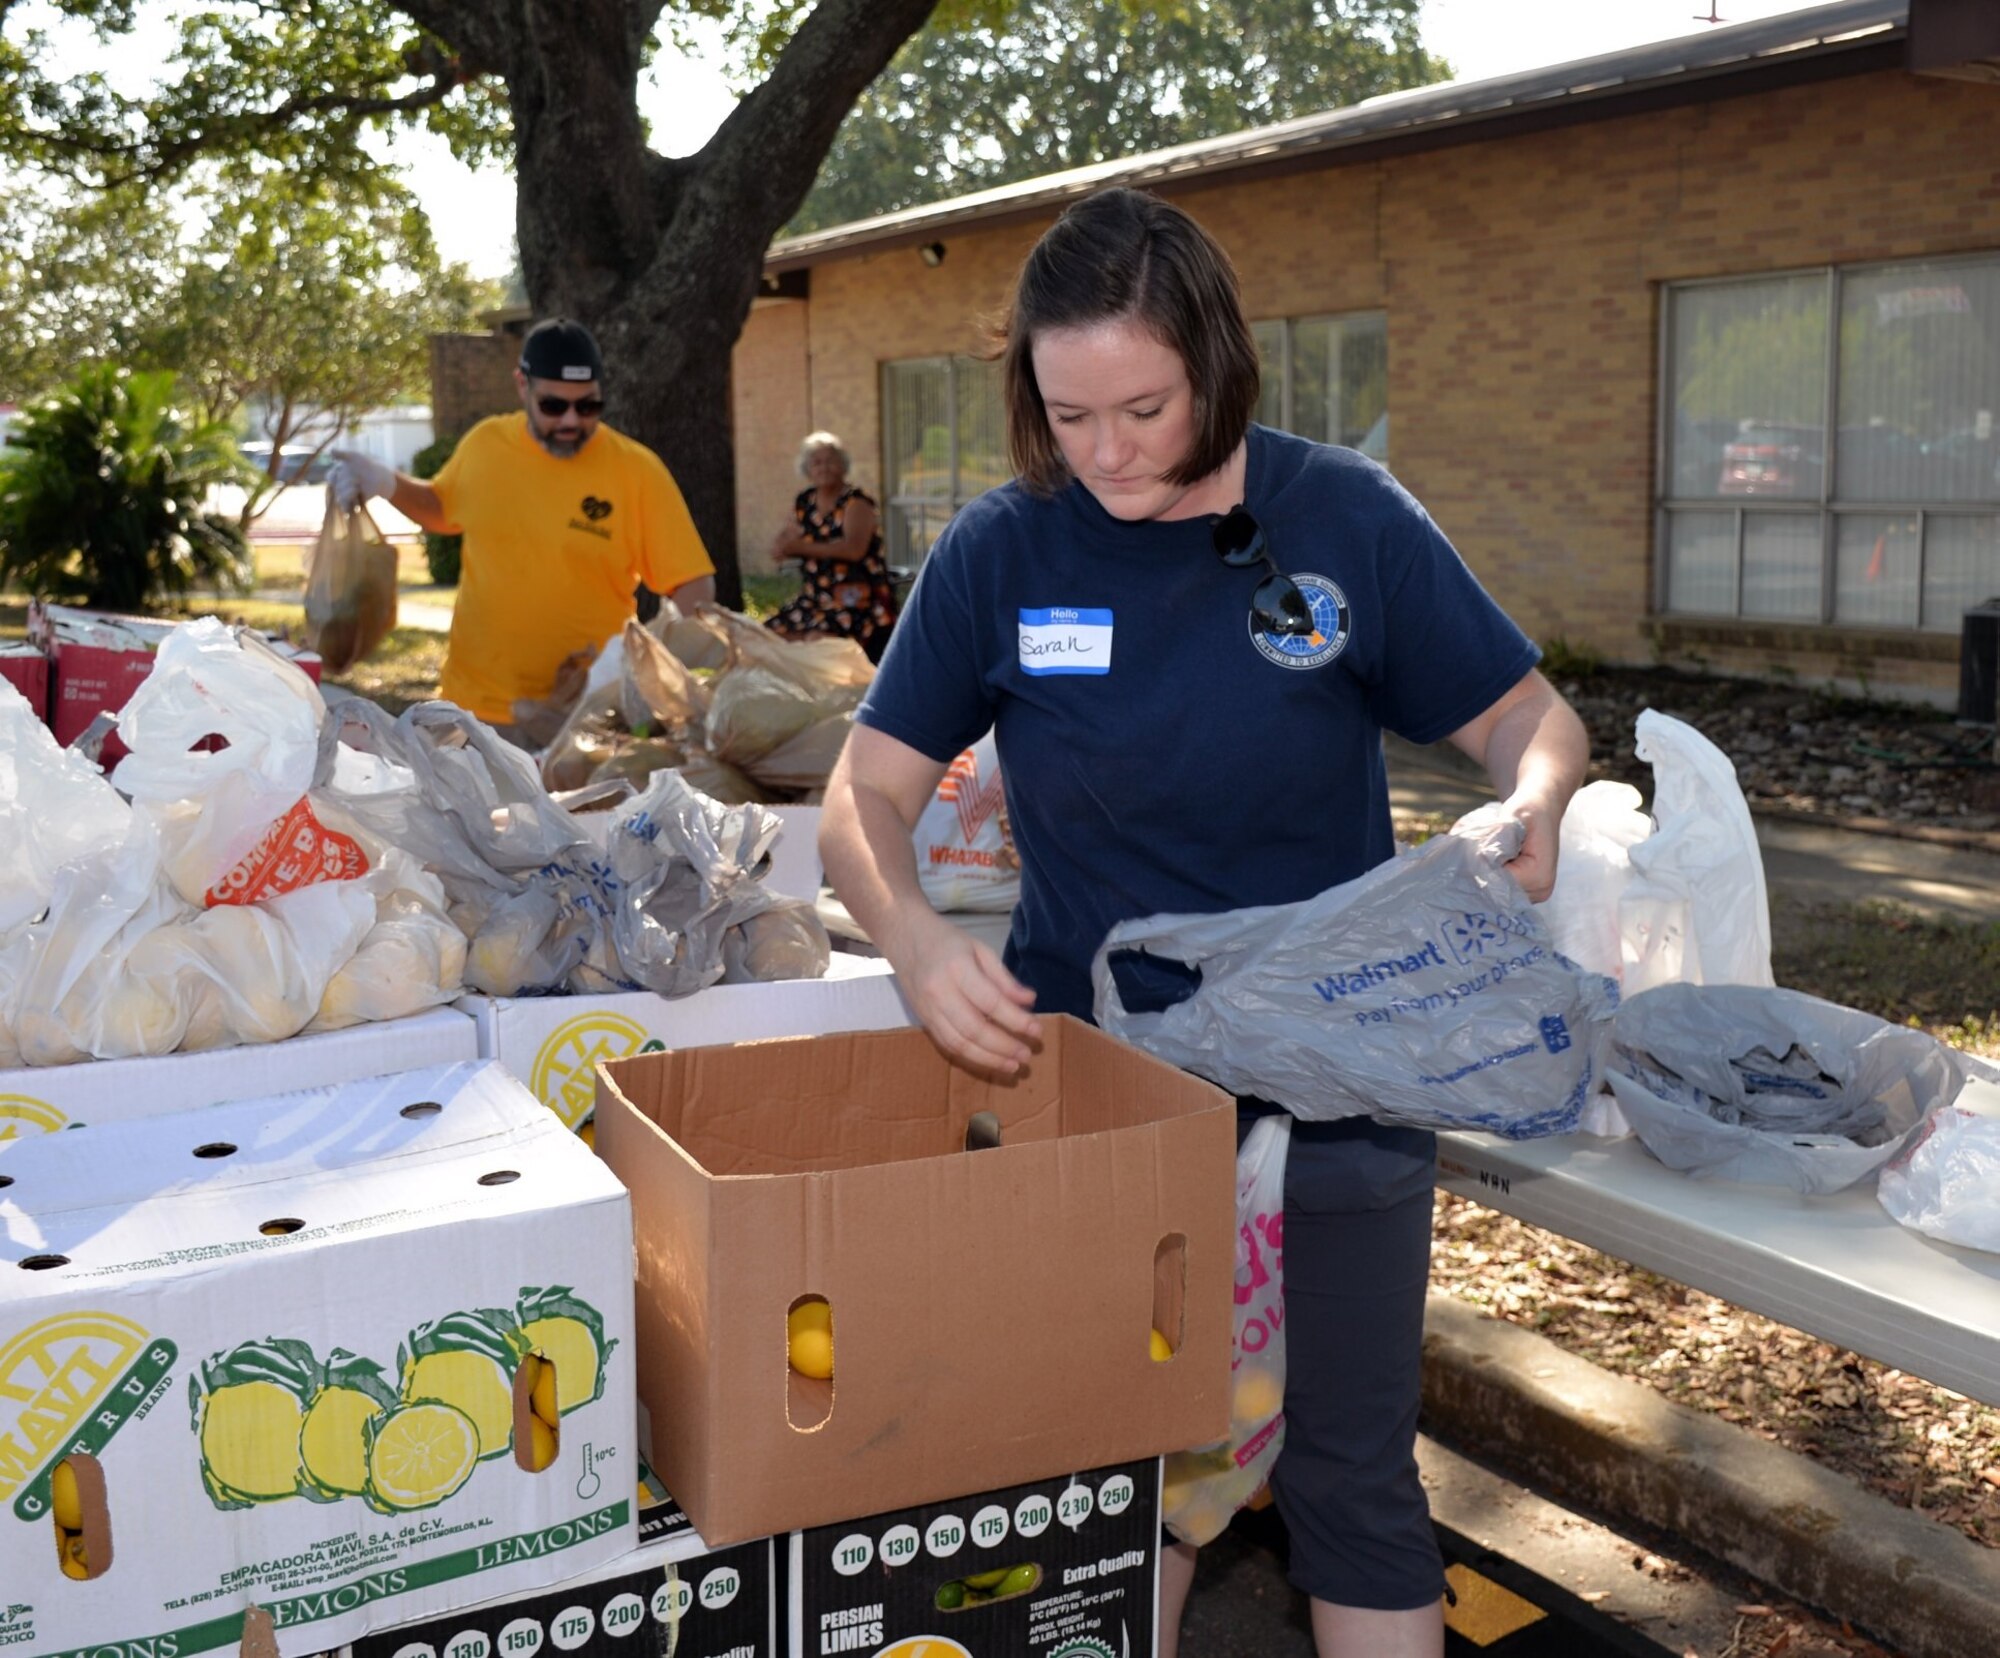 Senior Master Sgt. Sarah Cornelius, 426th Network Warfare Squadron, assembles packages of fresh produce during a San Antonio Food Bank distribution event at Windcrest United Methodist Church Sept. 19. Fifteen Reserve Citizen Airmen from the 433rd Airlift Wing and 960th Cyberspace Wing participated in three distribution events over two days.